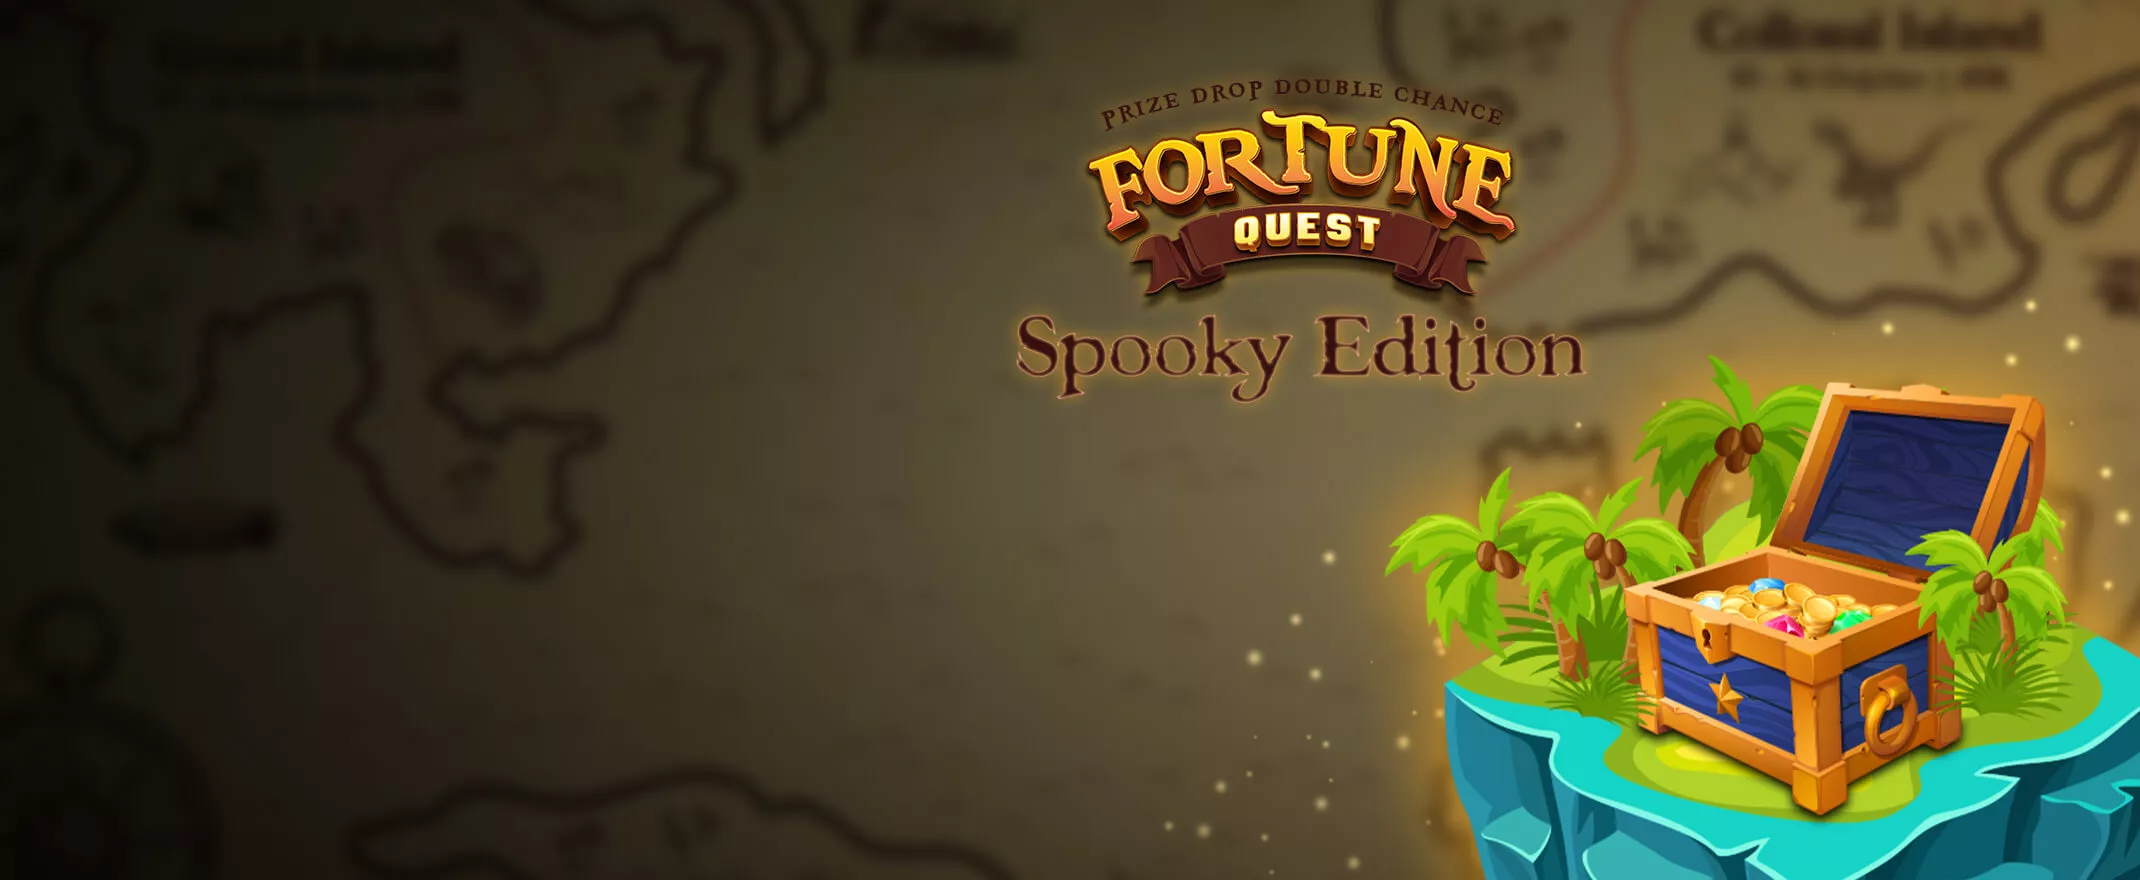 Yggdrasil Starts Fortune Quest with €120.000 Prize Pool